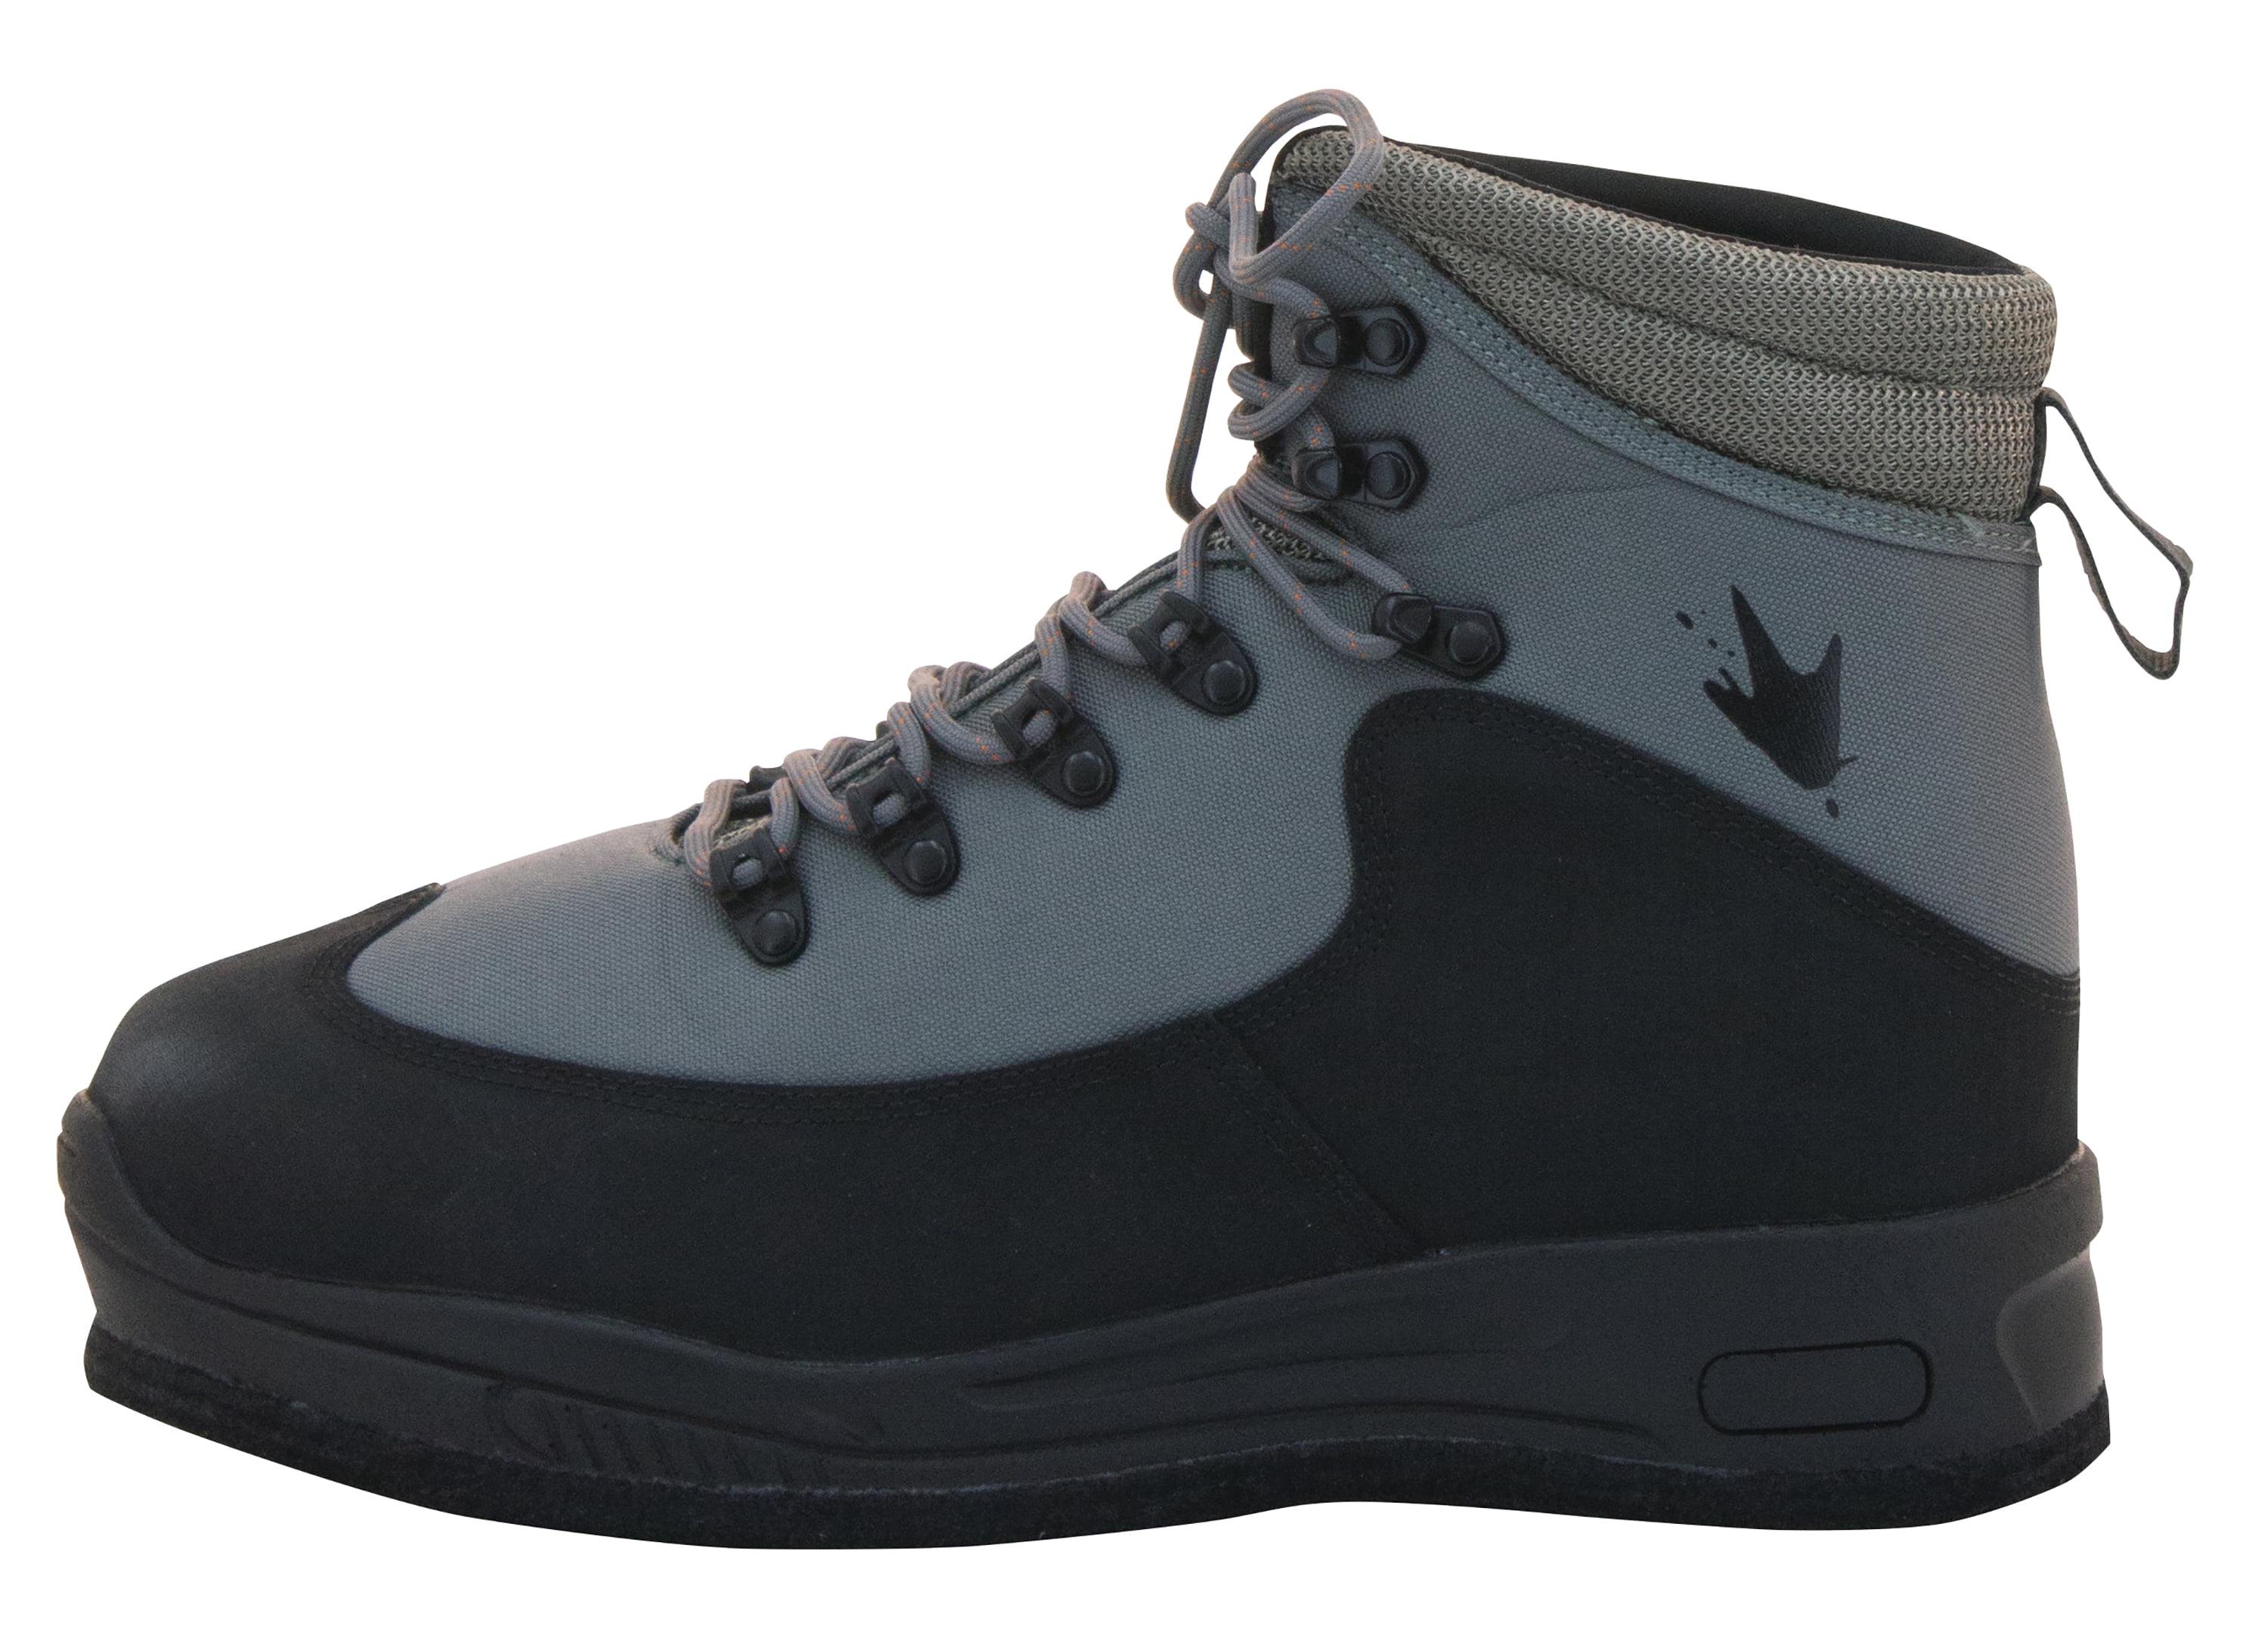 Details about   Frogg Toggs Amphib II Wading Shoe 